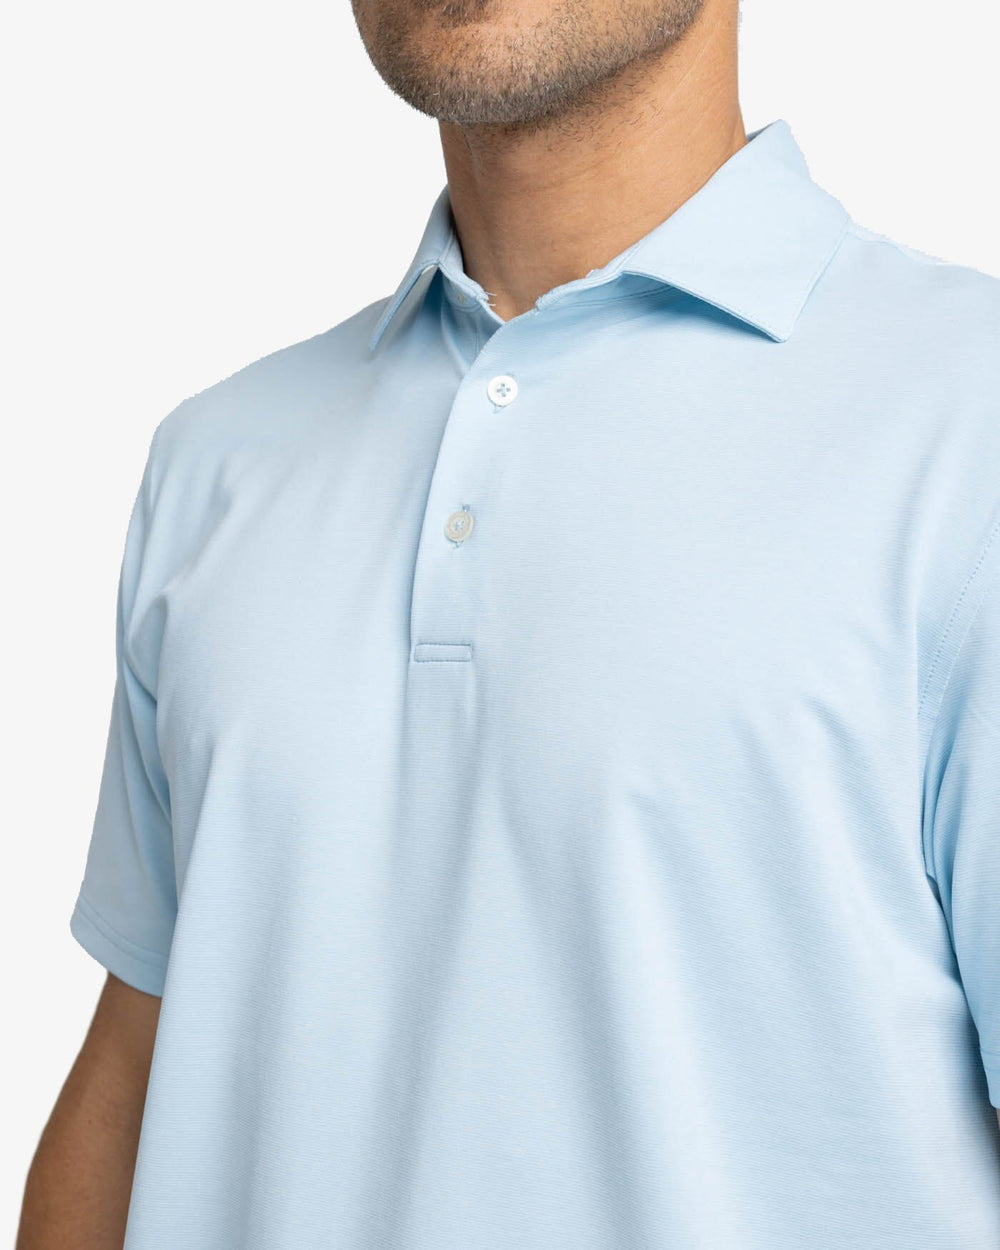 The detail view of the Southern Tide brrr-eeze Heather Performance Polo Shirt by Southern Tide - Heather Dream Blue